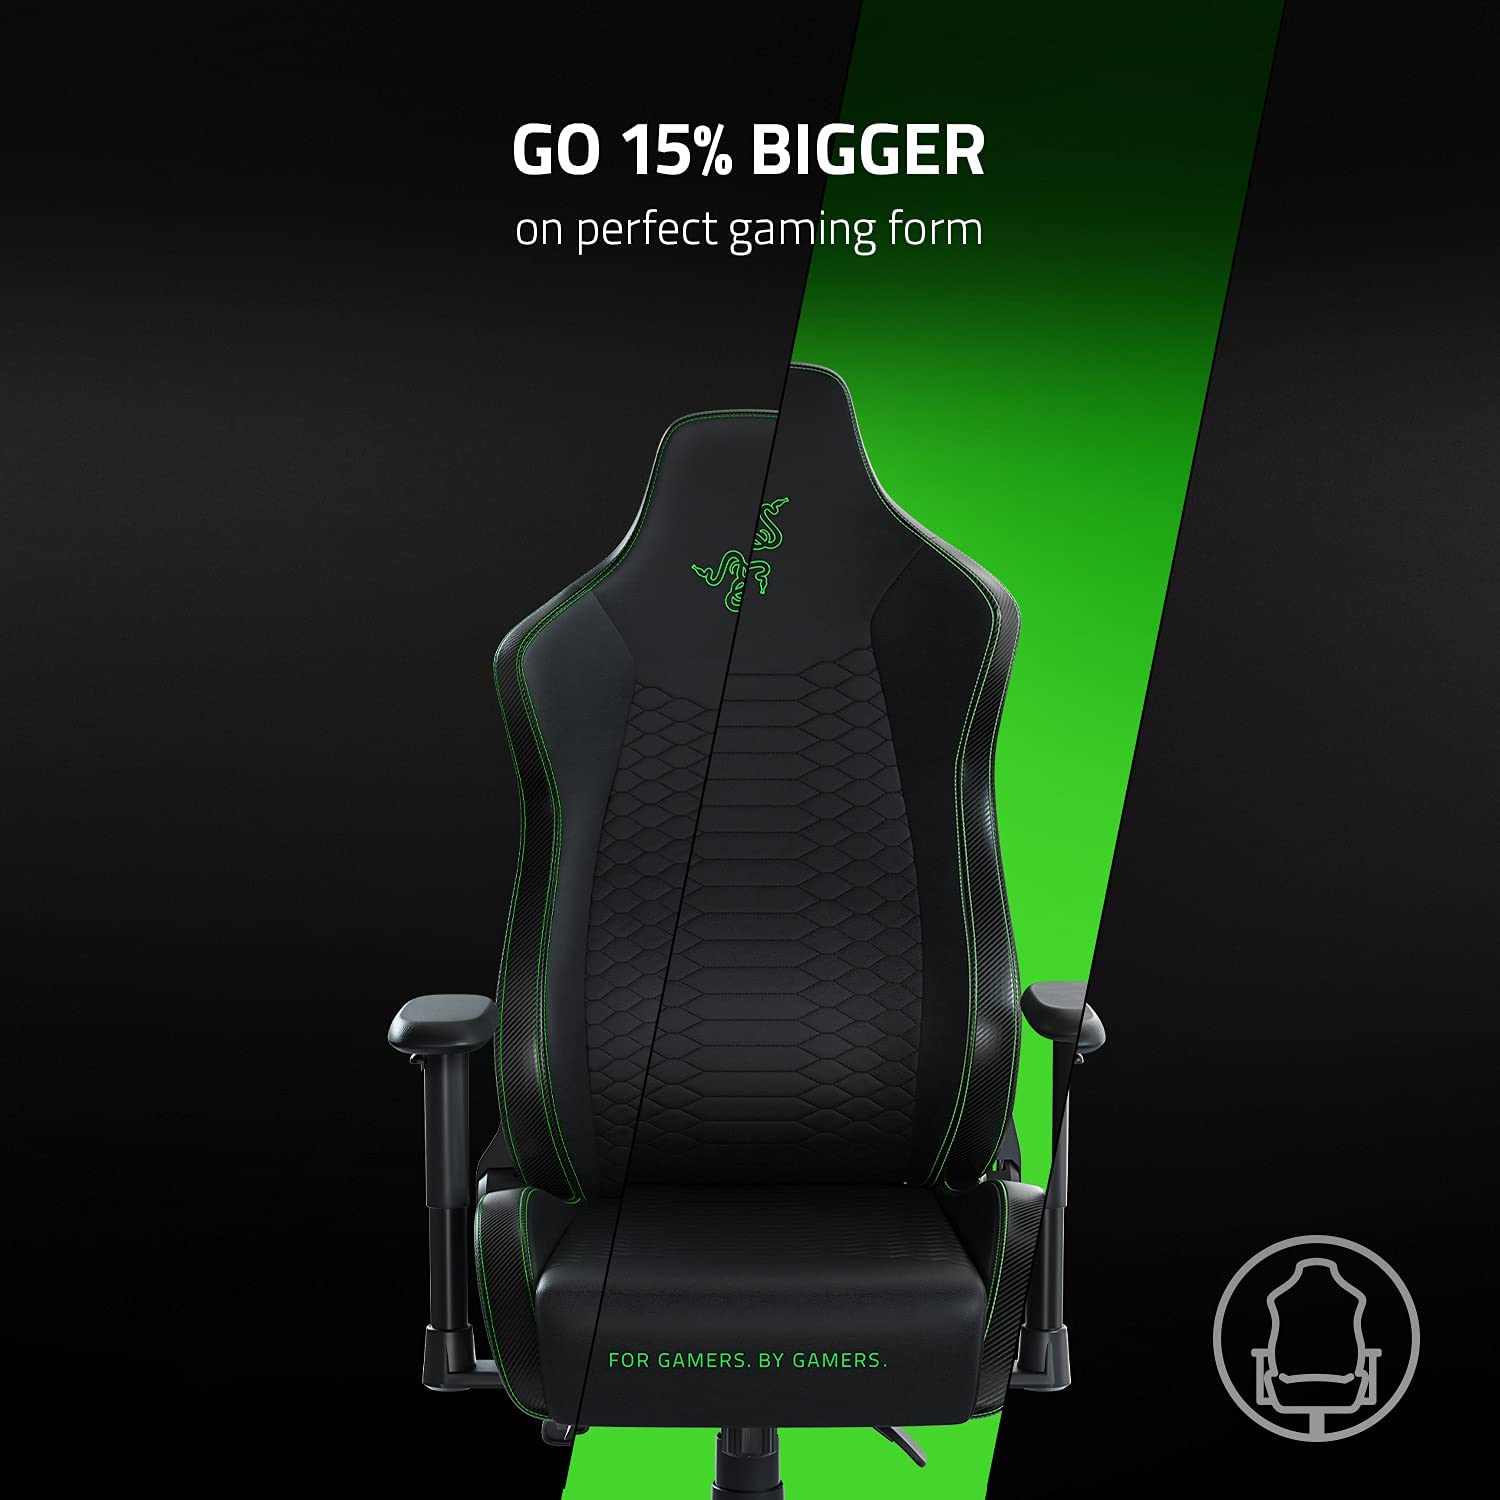 Iskur X XL Ergonomically Designed Hard Gaming Chair with Multi-Layer Foam Cushions PU Leather and 2D Armrests by Razer